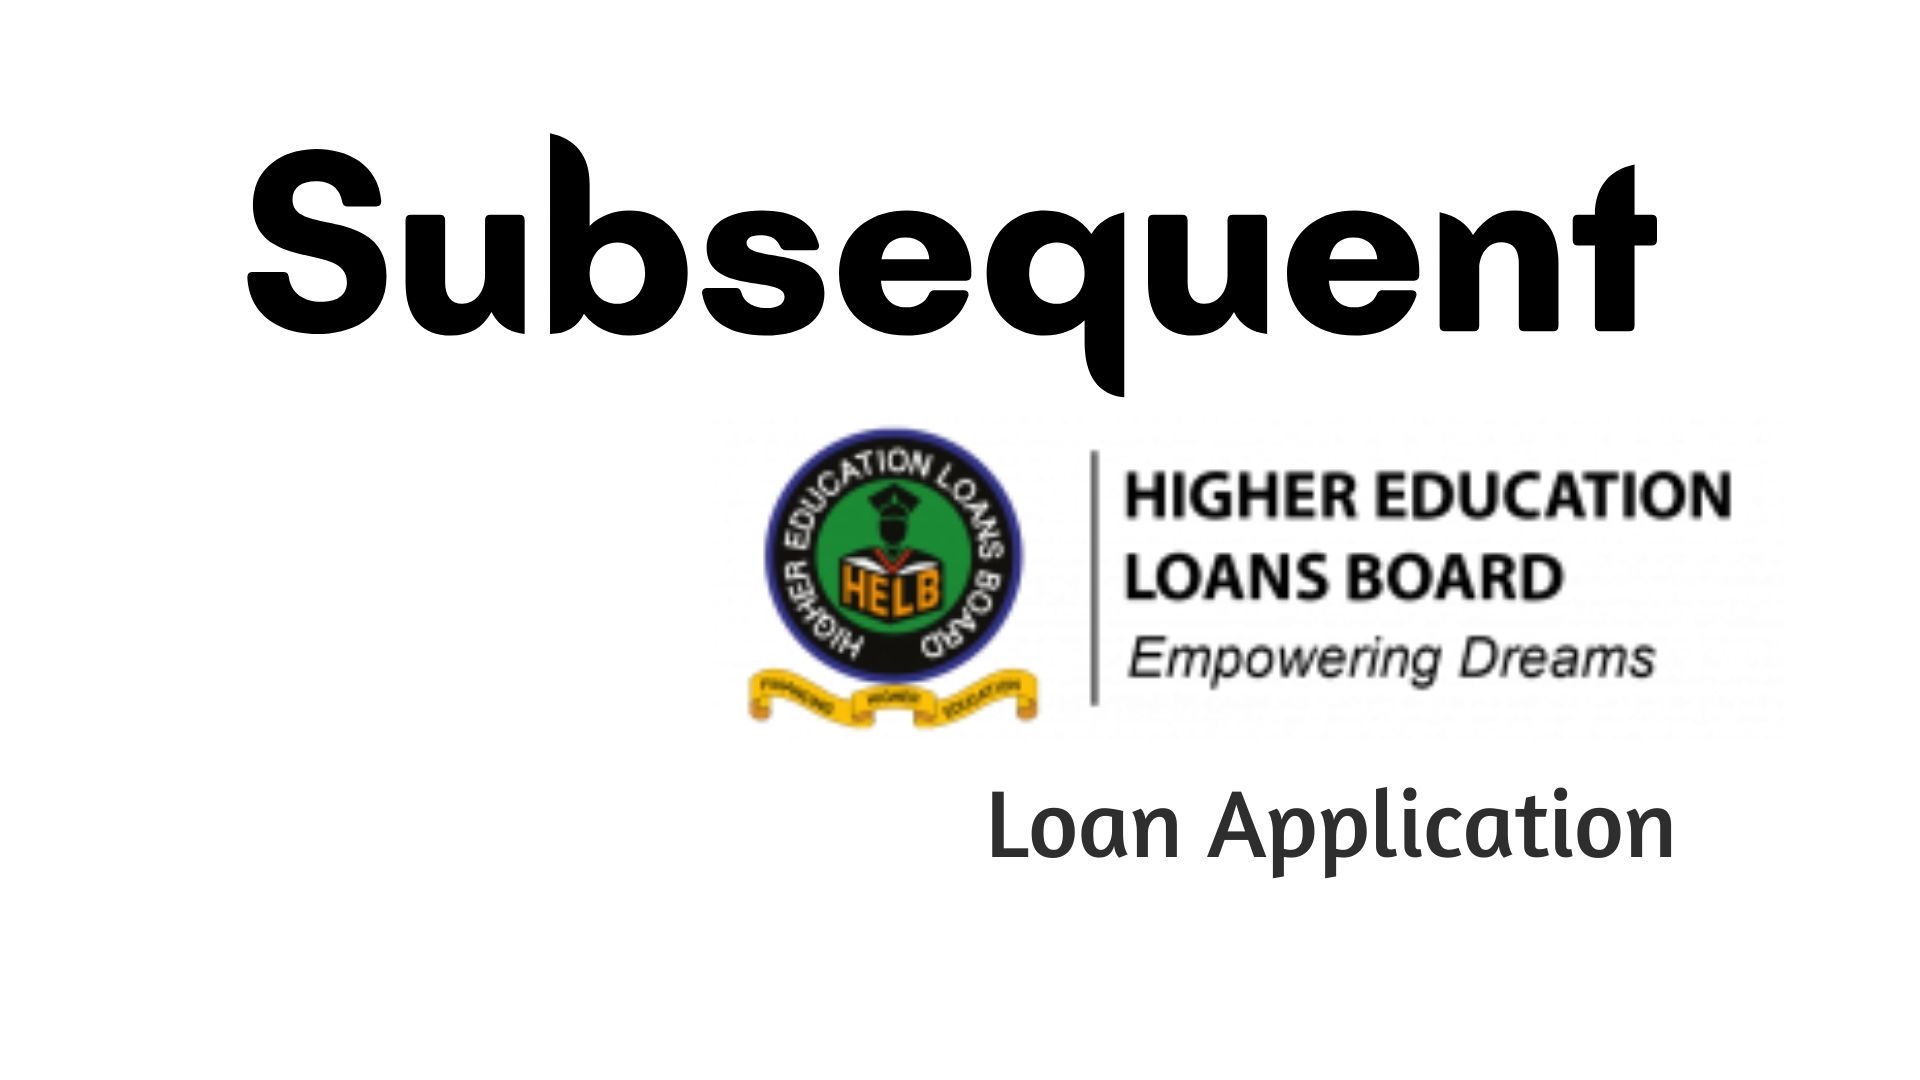 How to apply for Subsequent HELB Loan via app or *642#